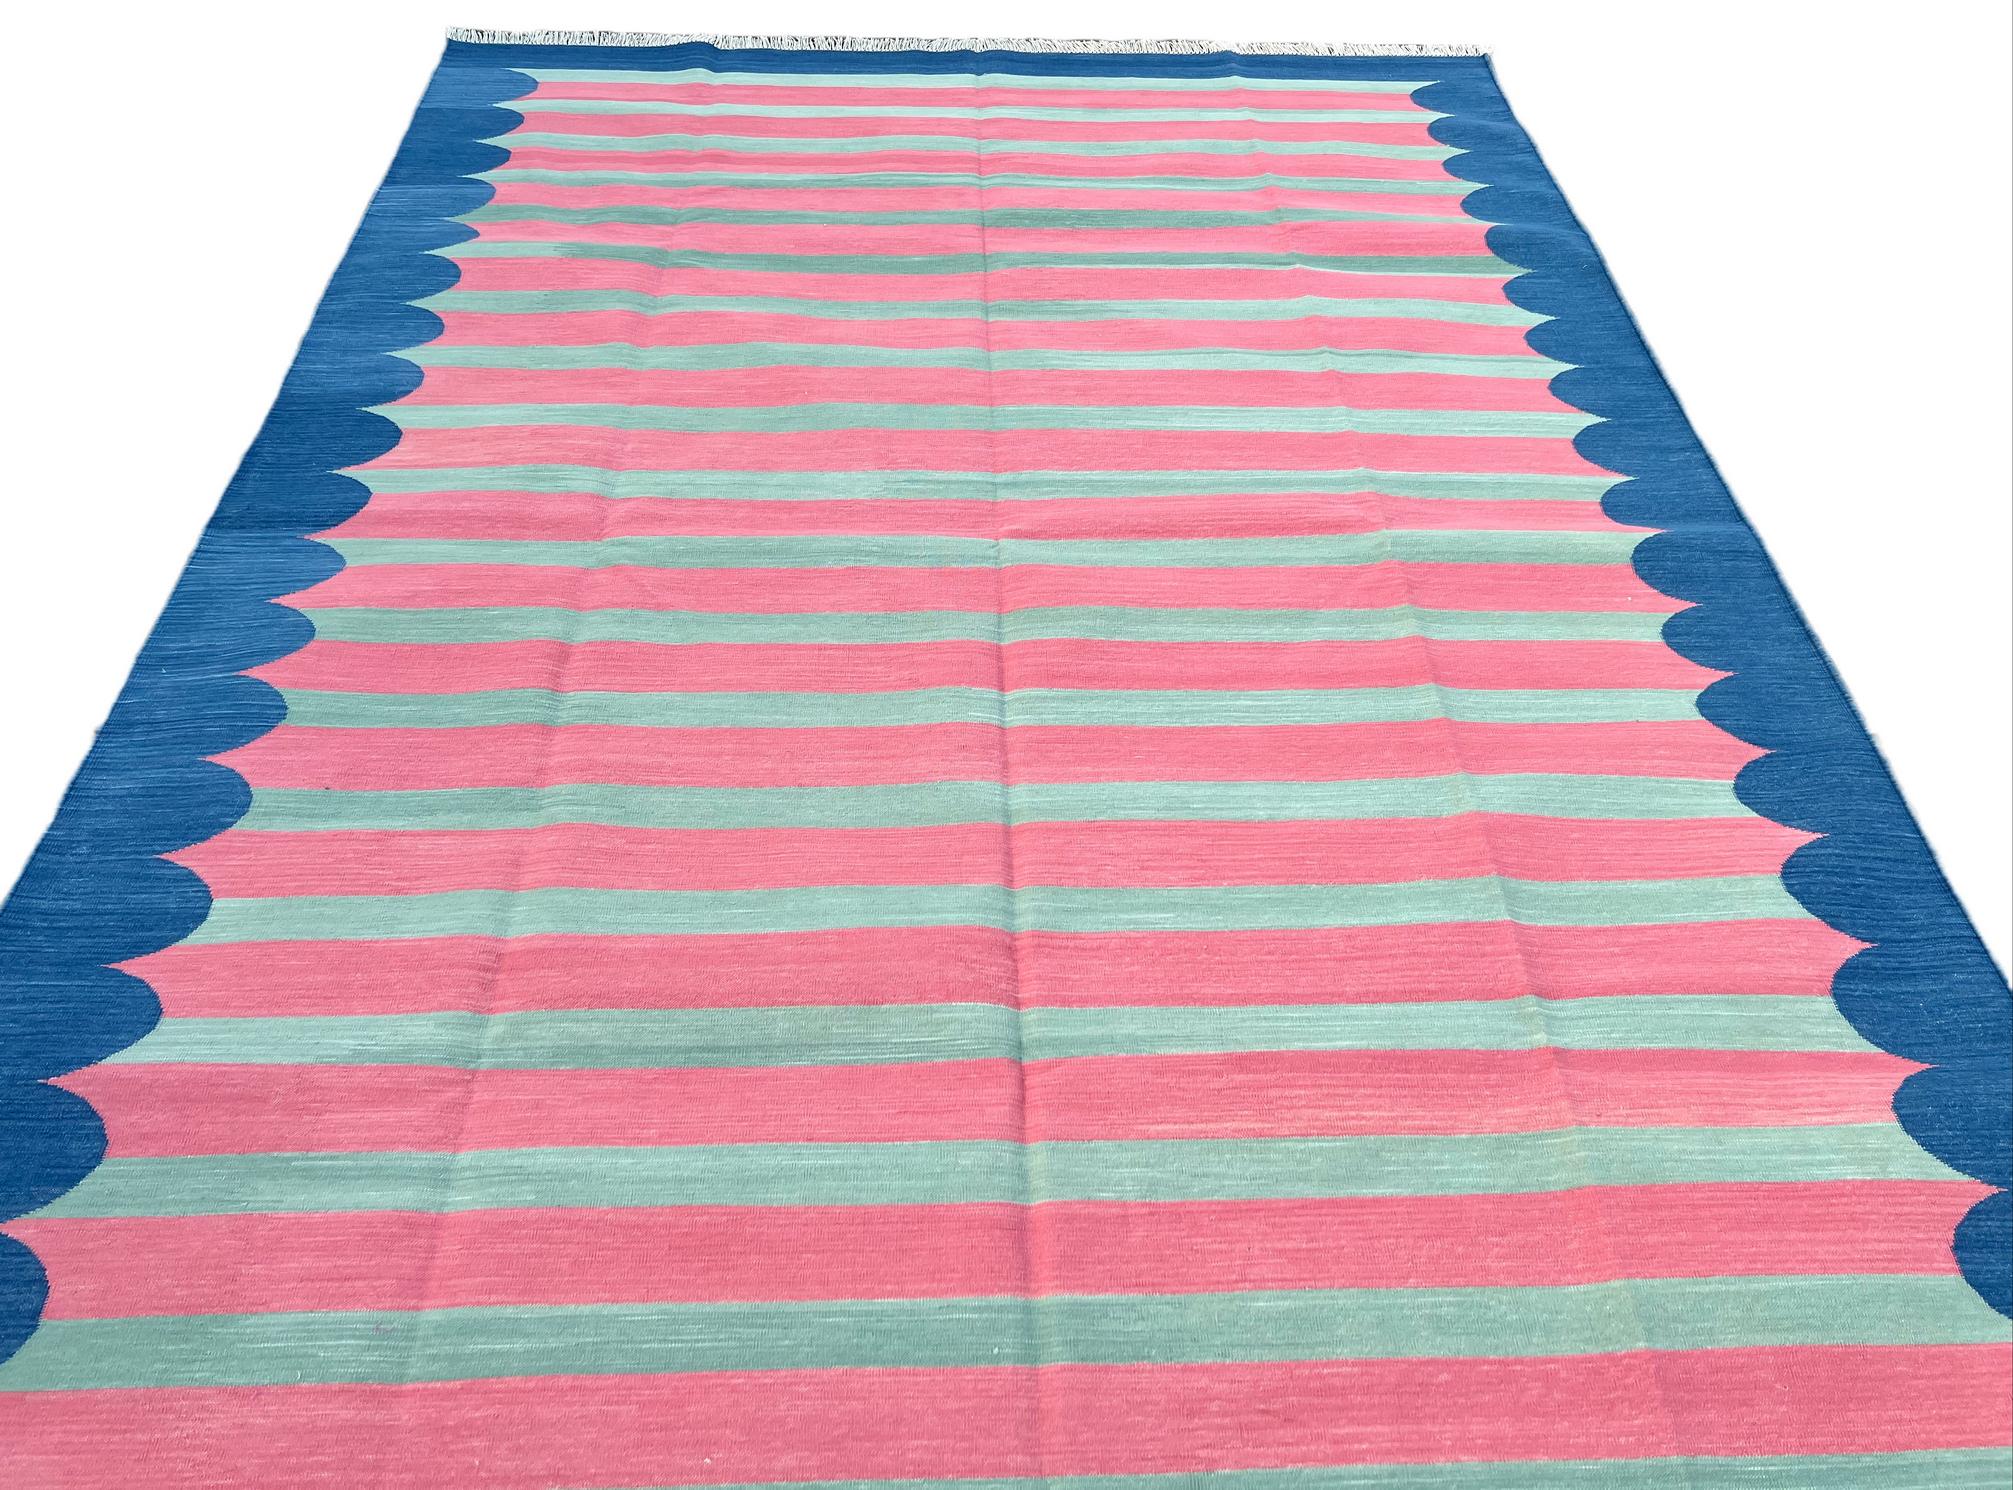 Contemporary Handmade Cotton Area Flat Weave Rug, Pink And Blue Scalloped Striped Dhurrie Rug For Sale